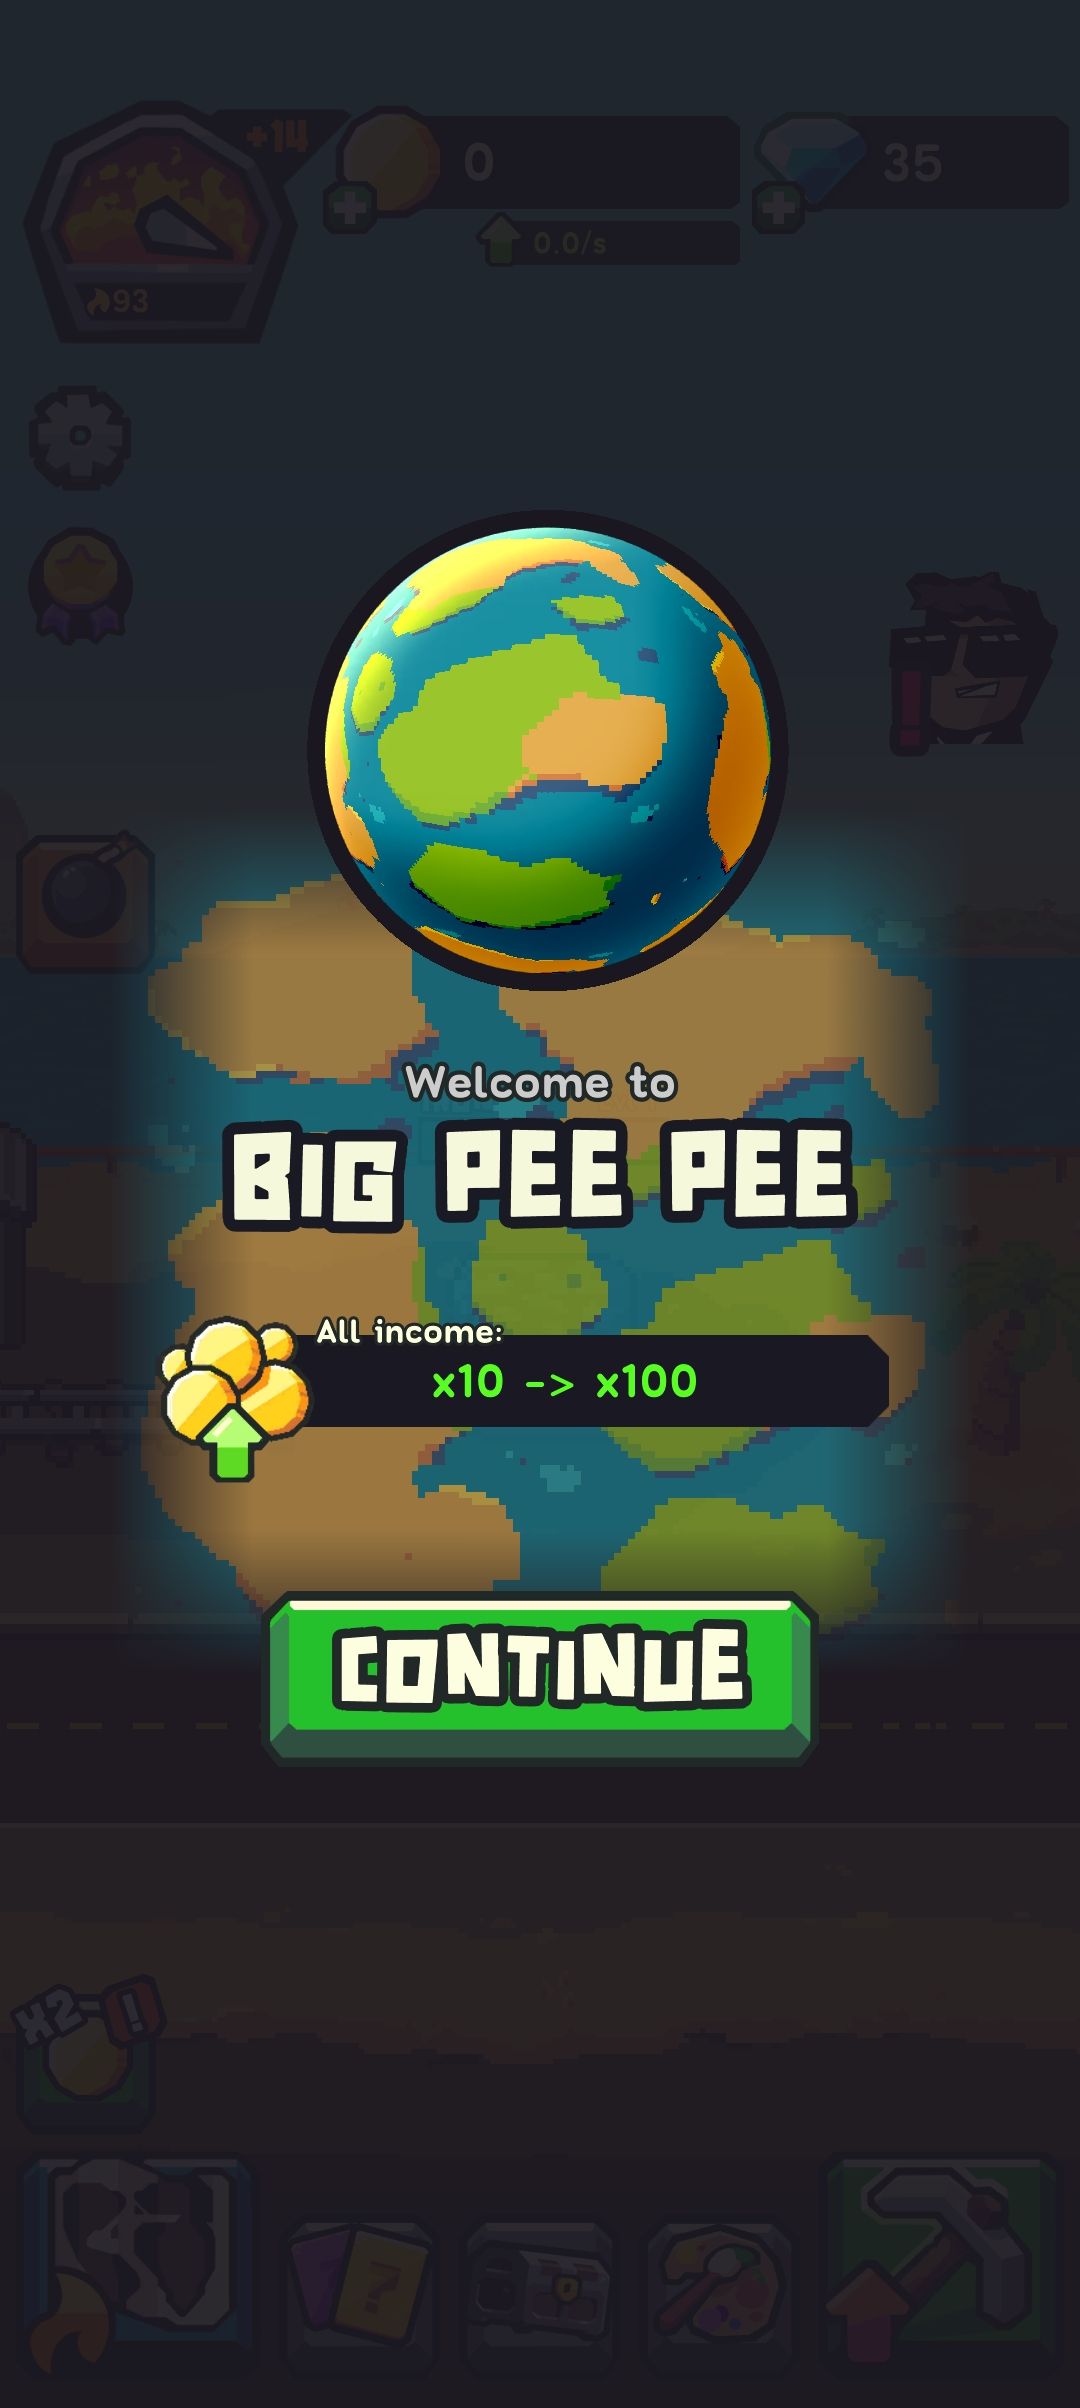 93
1270
Welcome to
BIG PEE PEE
All income:
0.0/s
3
R
x10 -> x100
CONTINUE
35
2 B